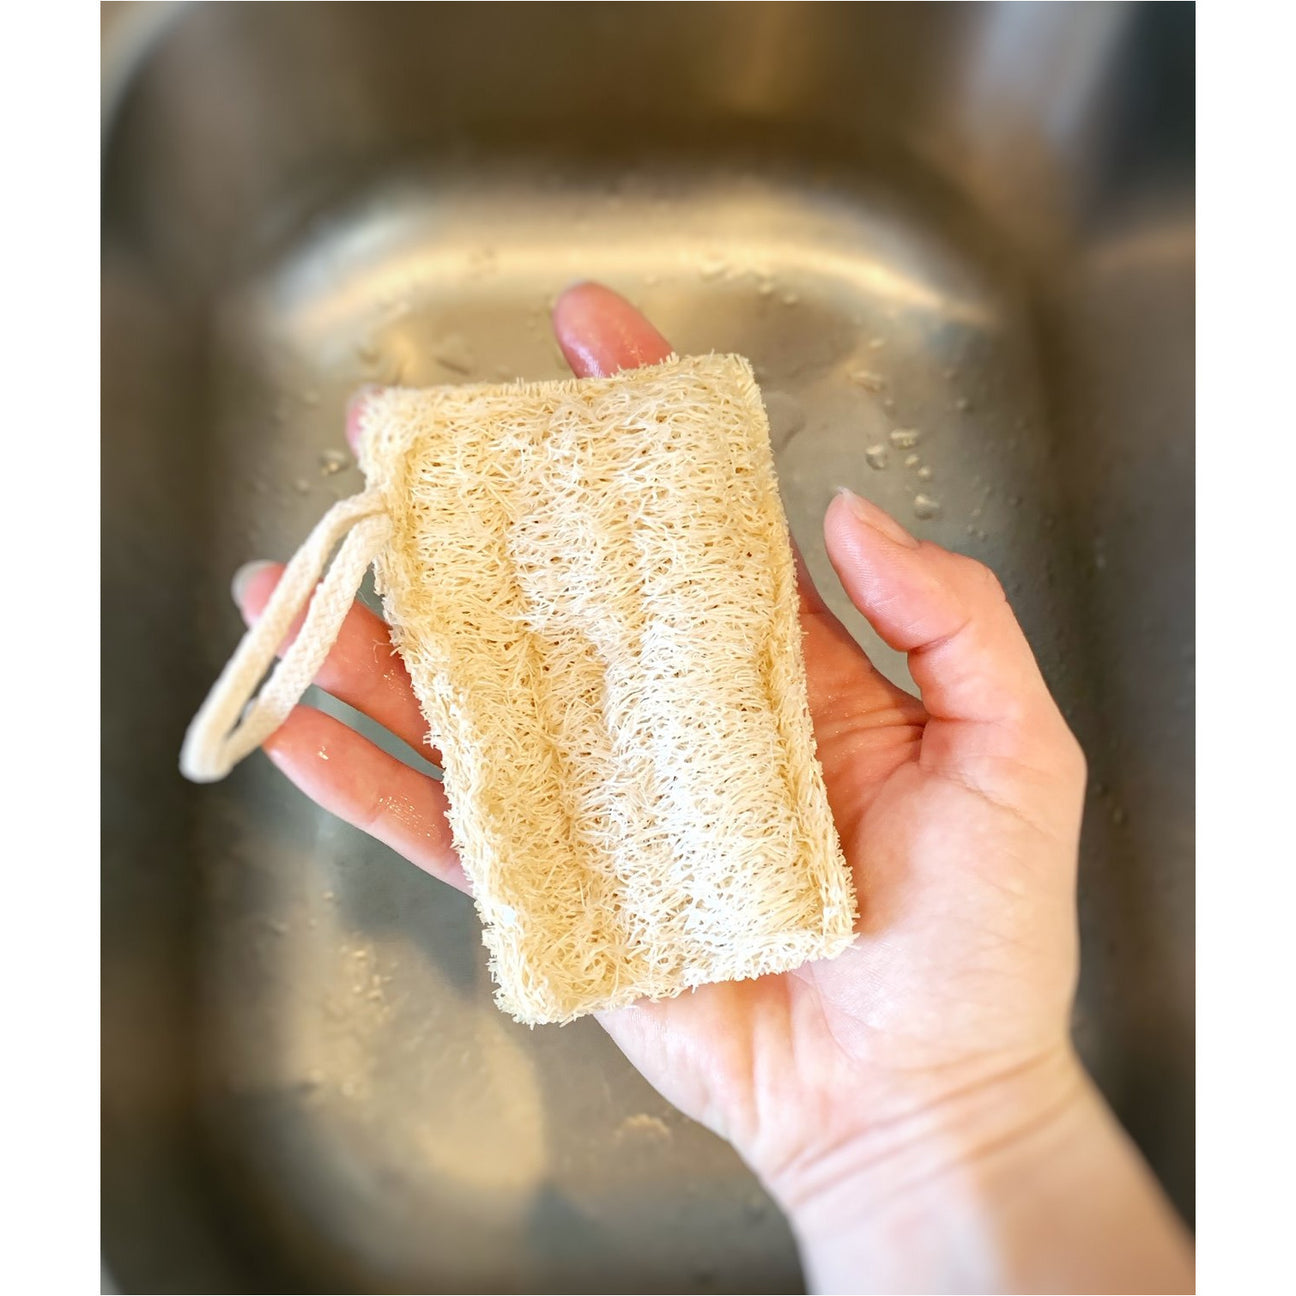 Me Mother Earth Double Layer Loofah Dish Sponge - 3 Pack